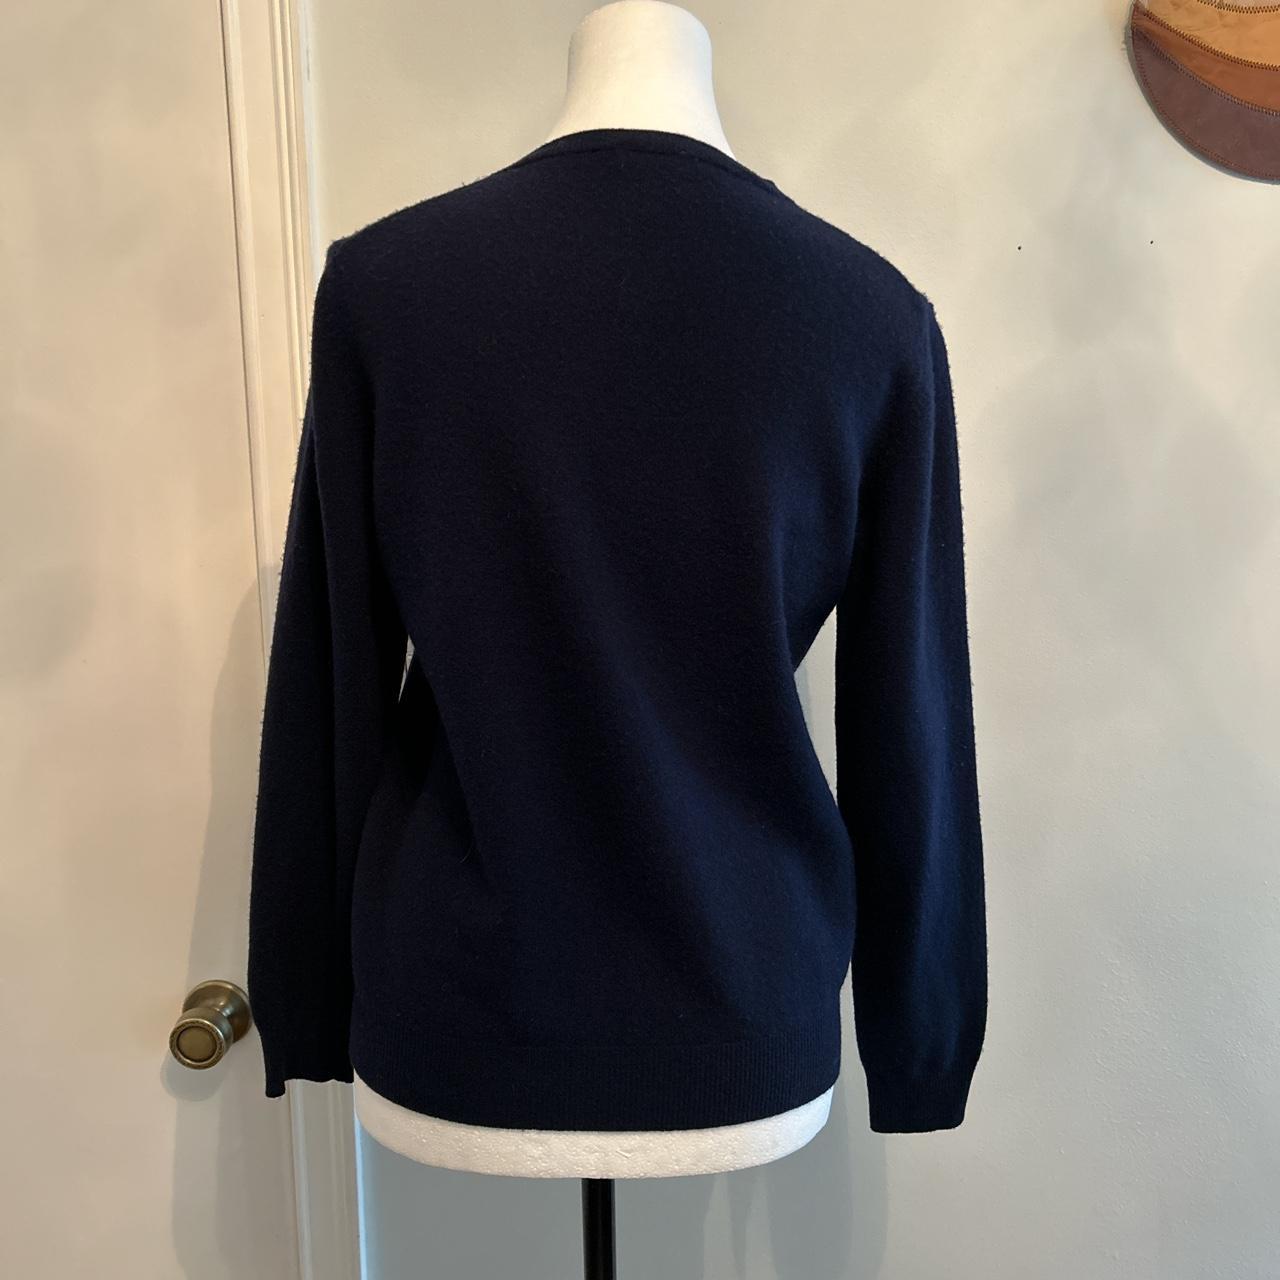 United Colors of Benetton Women's Navy and Blue Cardigan | Depop